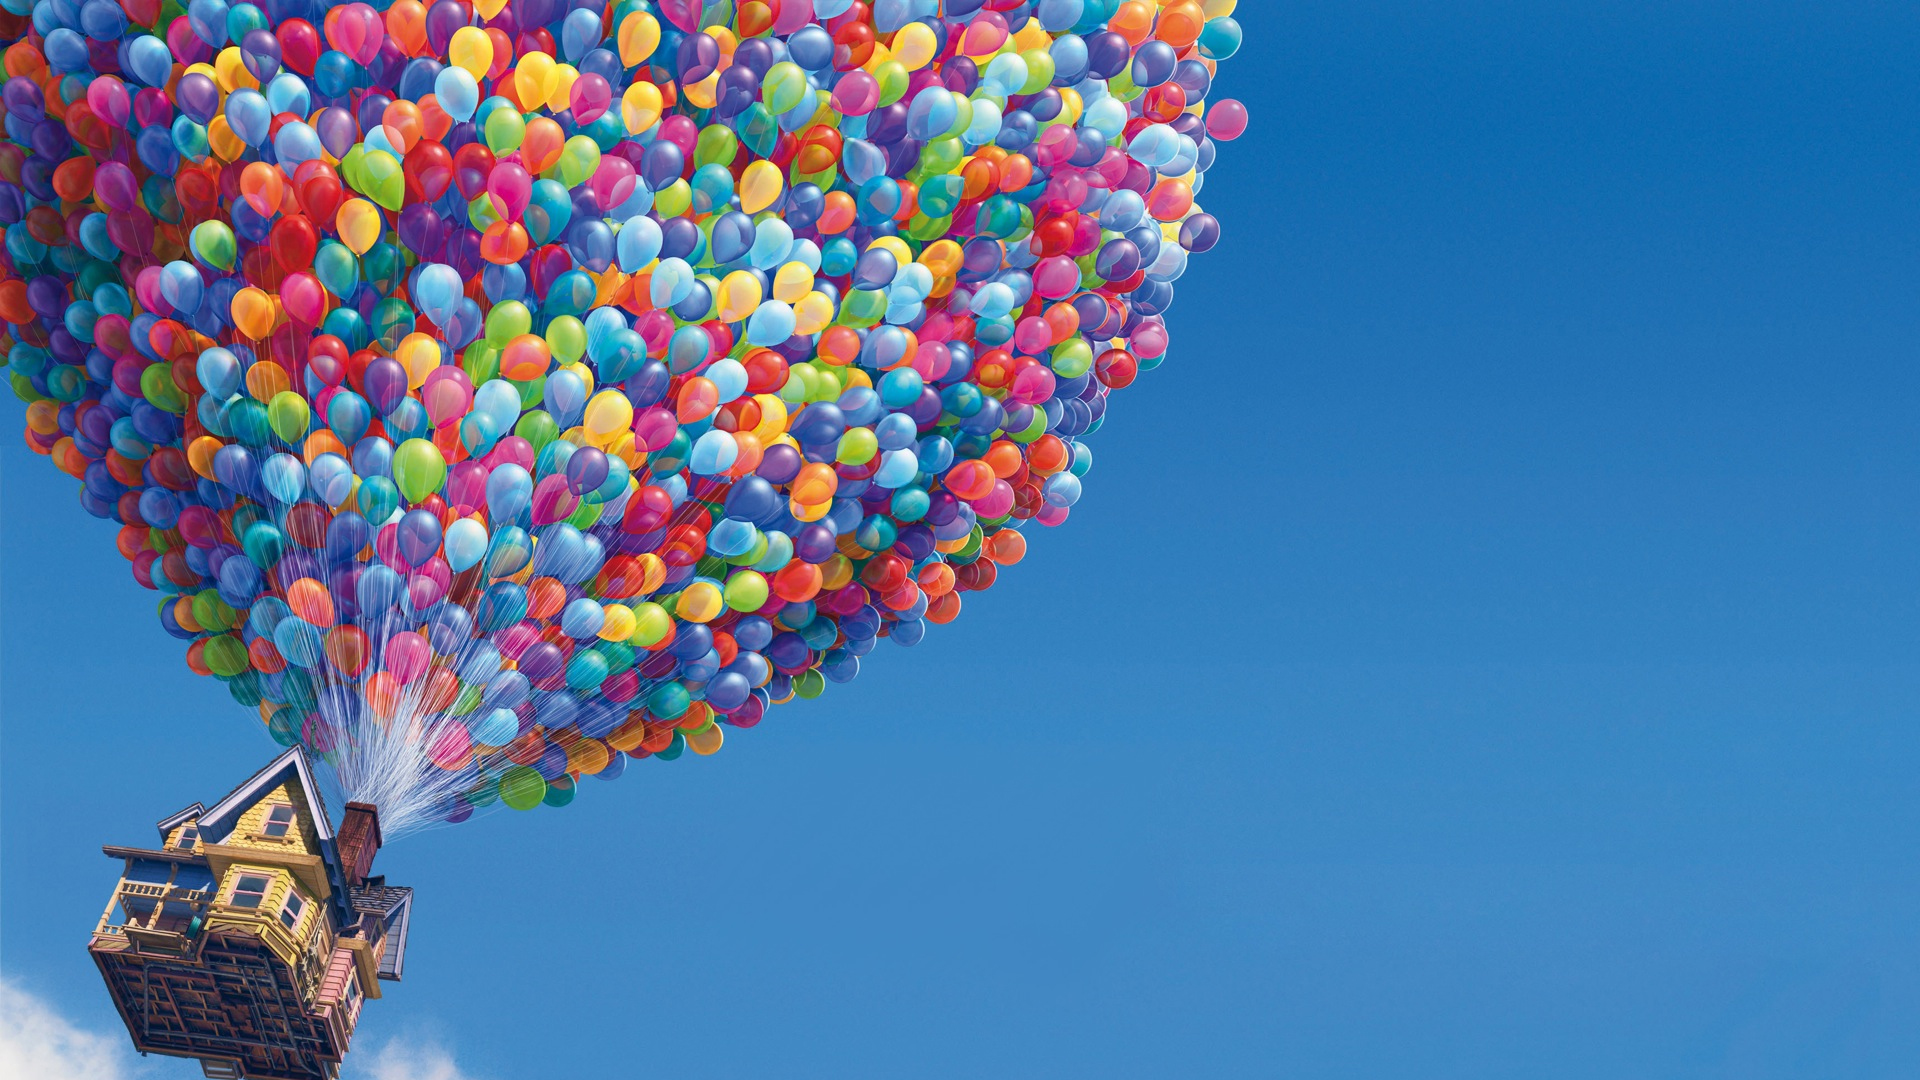 Few Thoughts on Pixar's "Up" | dadcraft